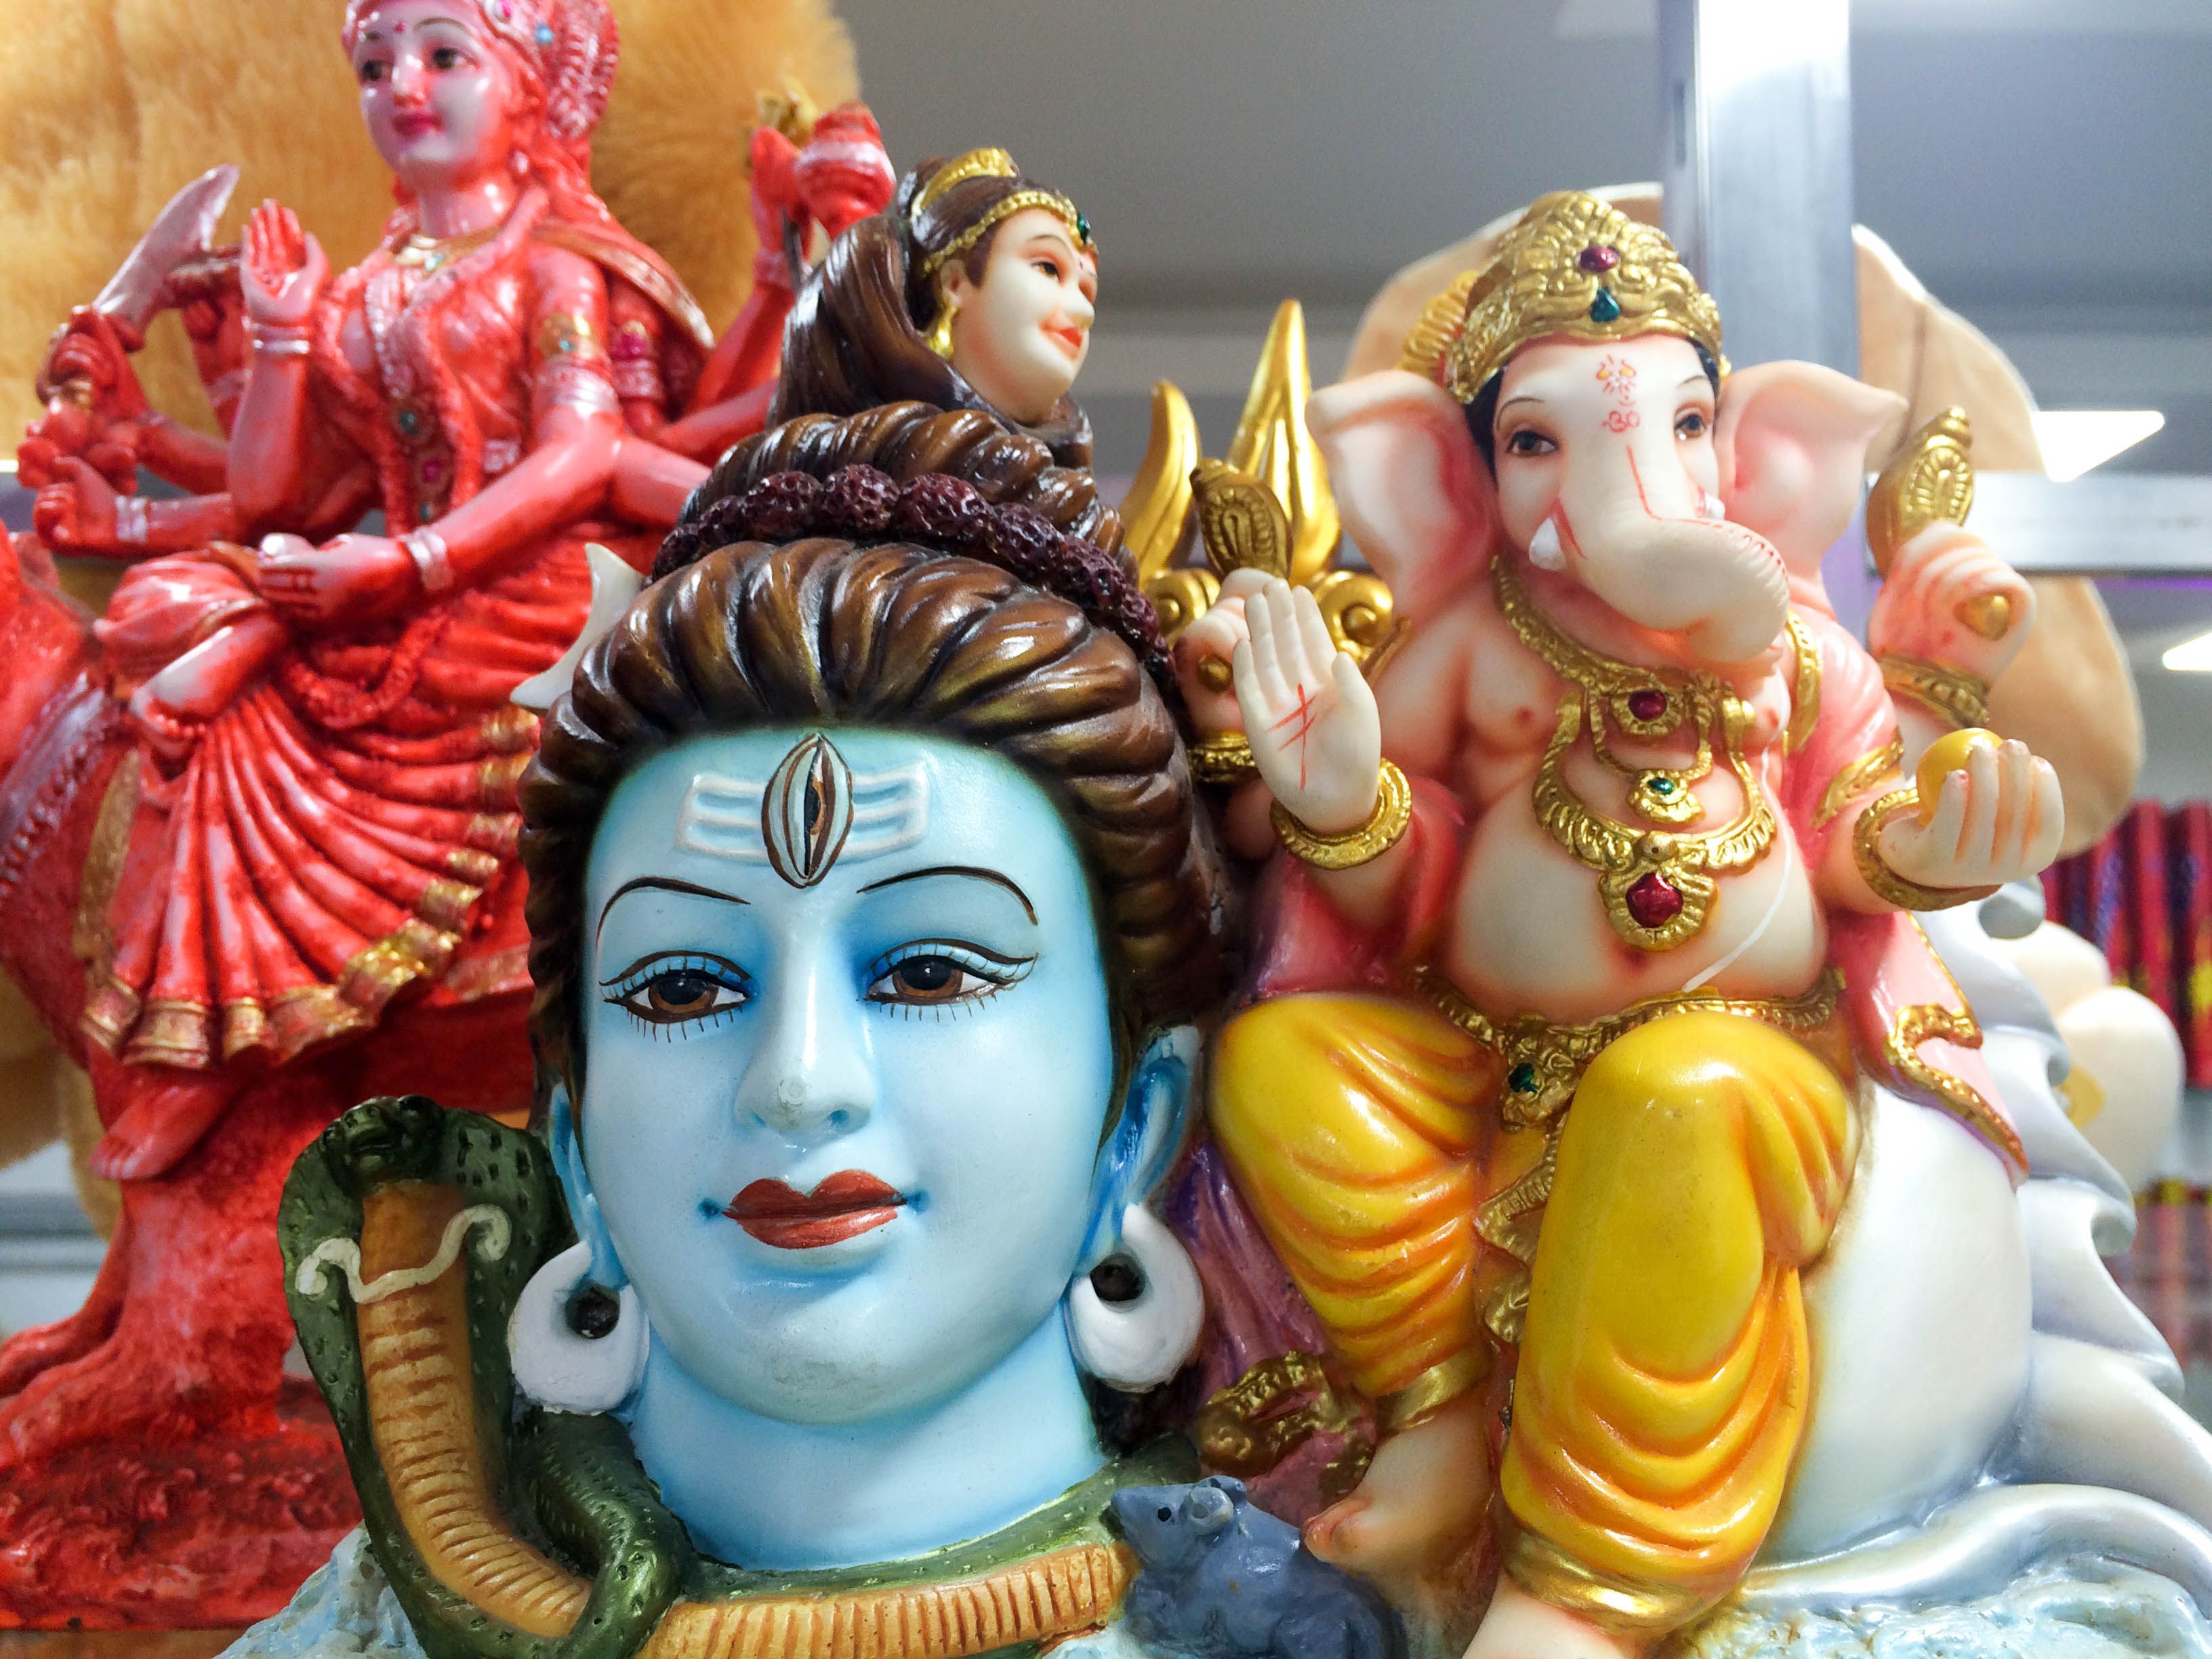 Shiva Parvati Ganesha Image statuette representing Lord Ganesh and his father Lord